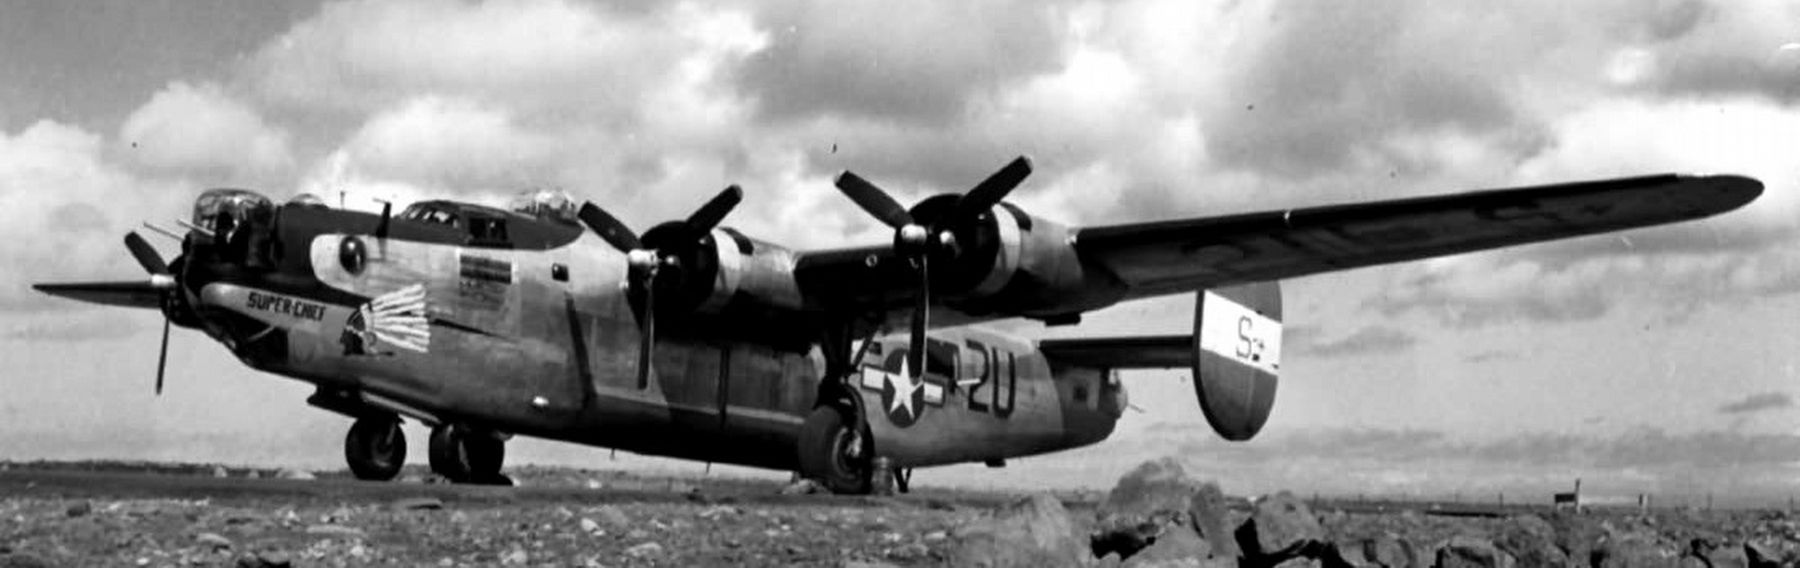 B-24H 42-51158 “Super Chief” of the 466th Bomb Group image. Click for full size.